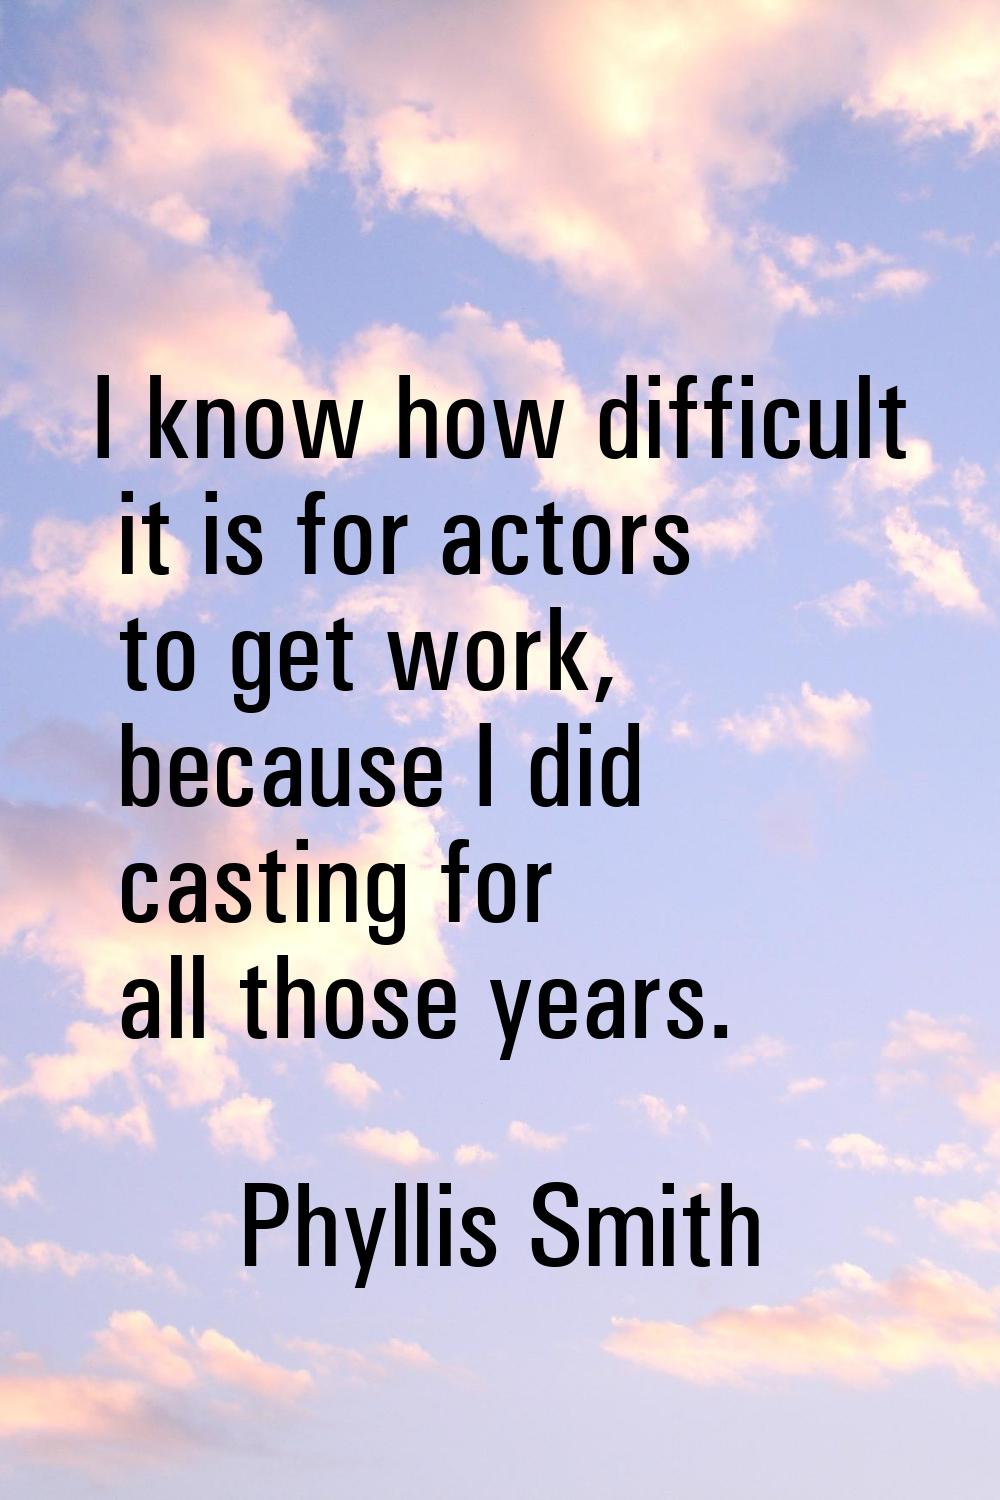 I know how difficult it is for actors to get work, because I did casting for all those years.